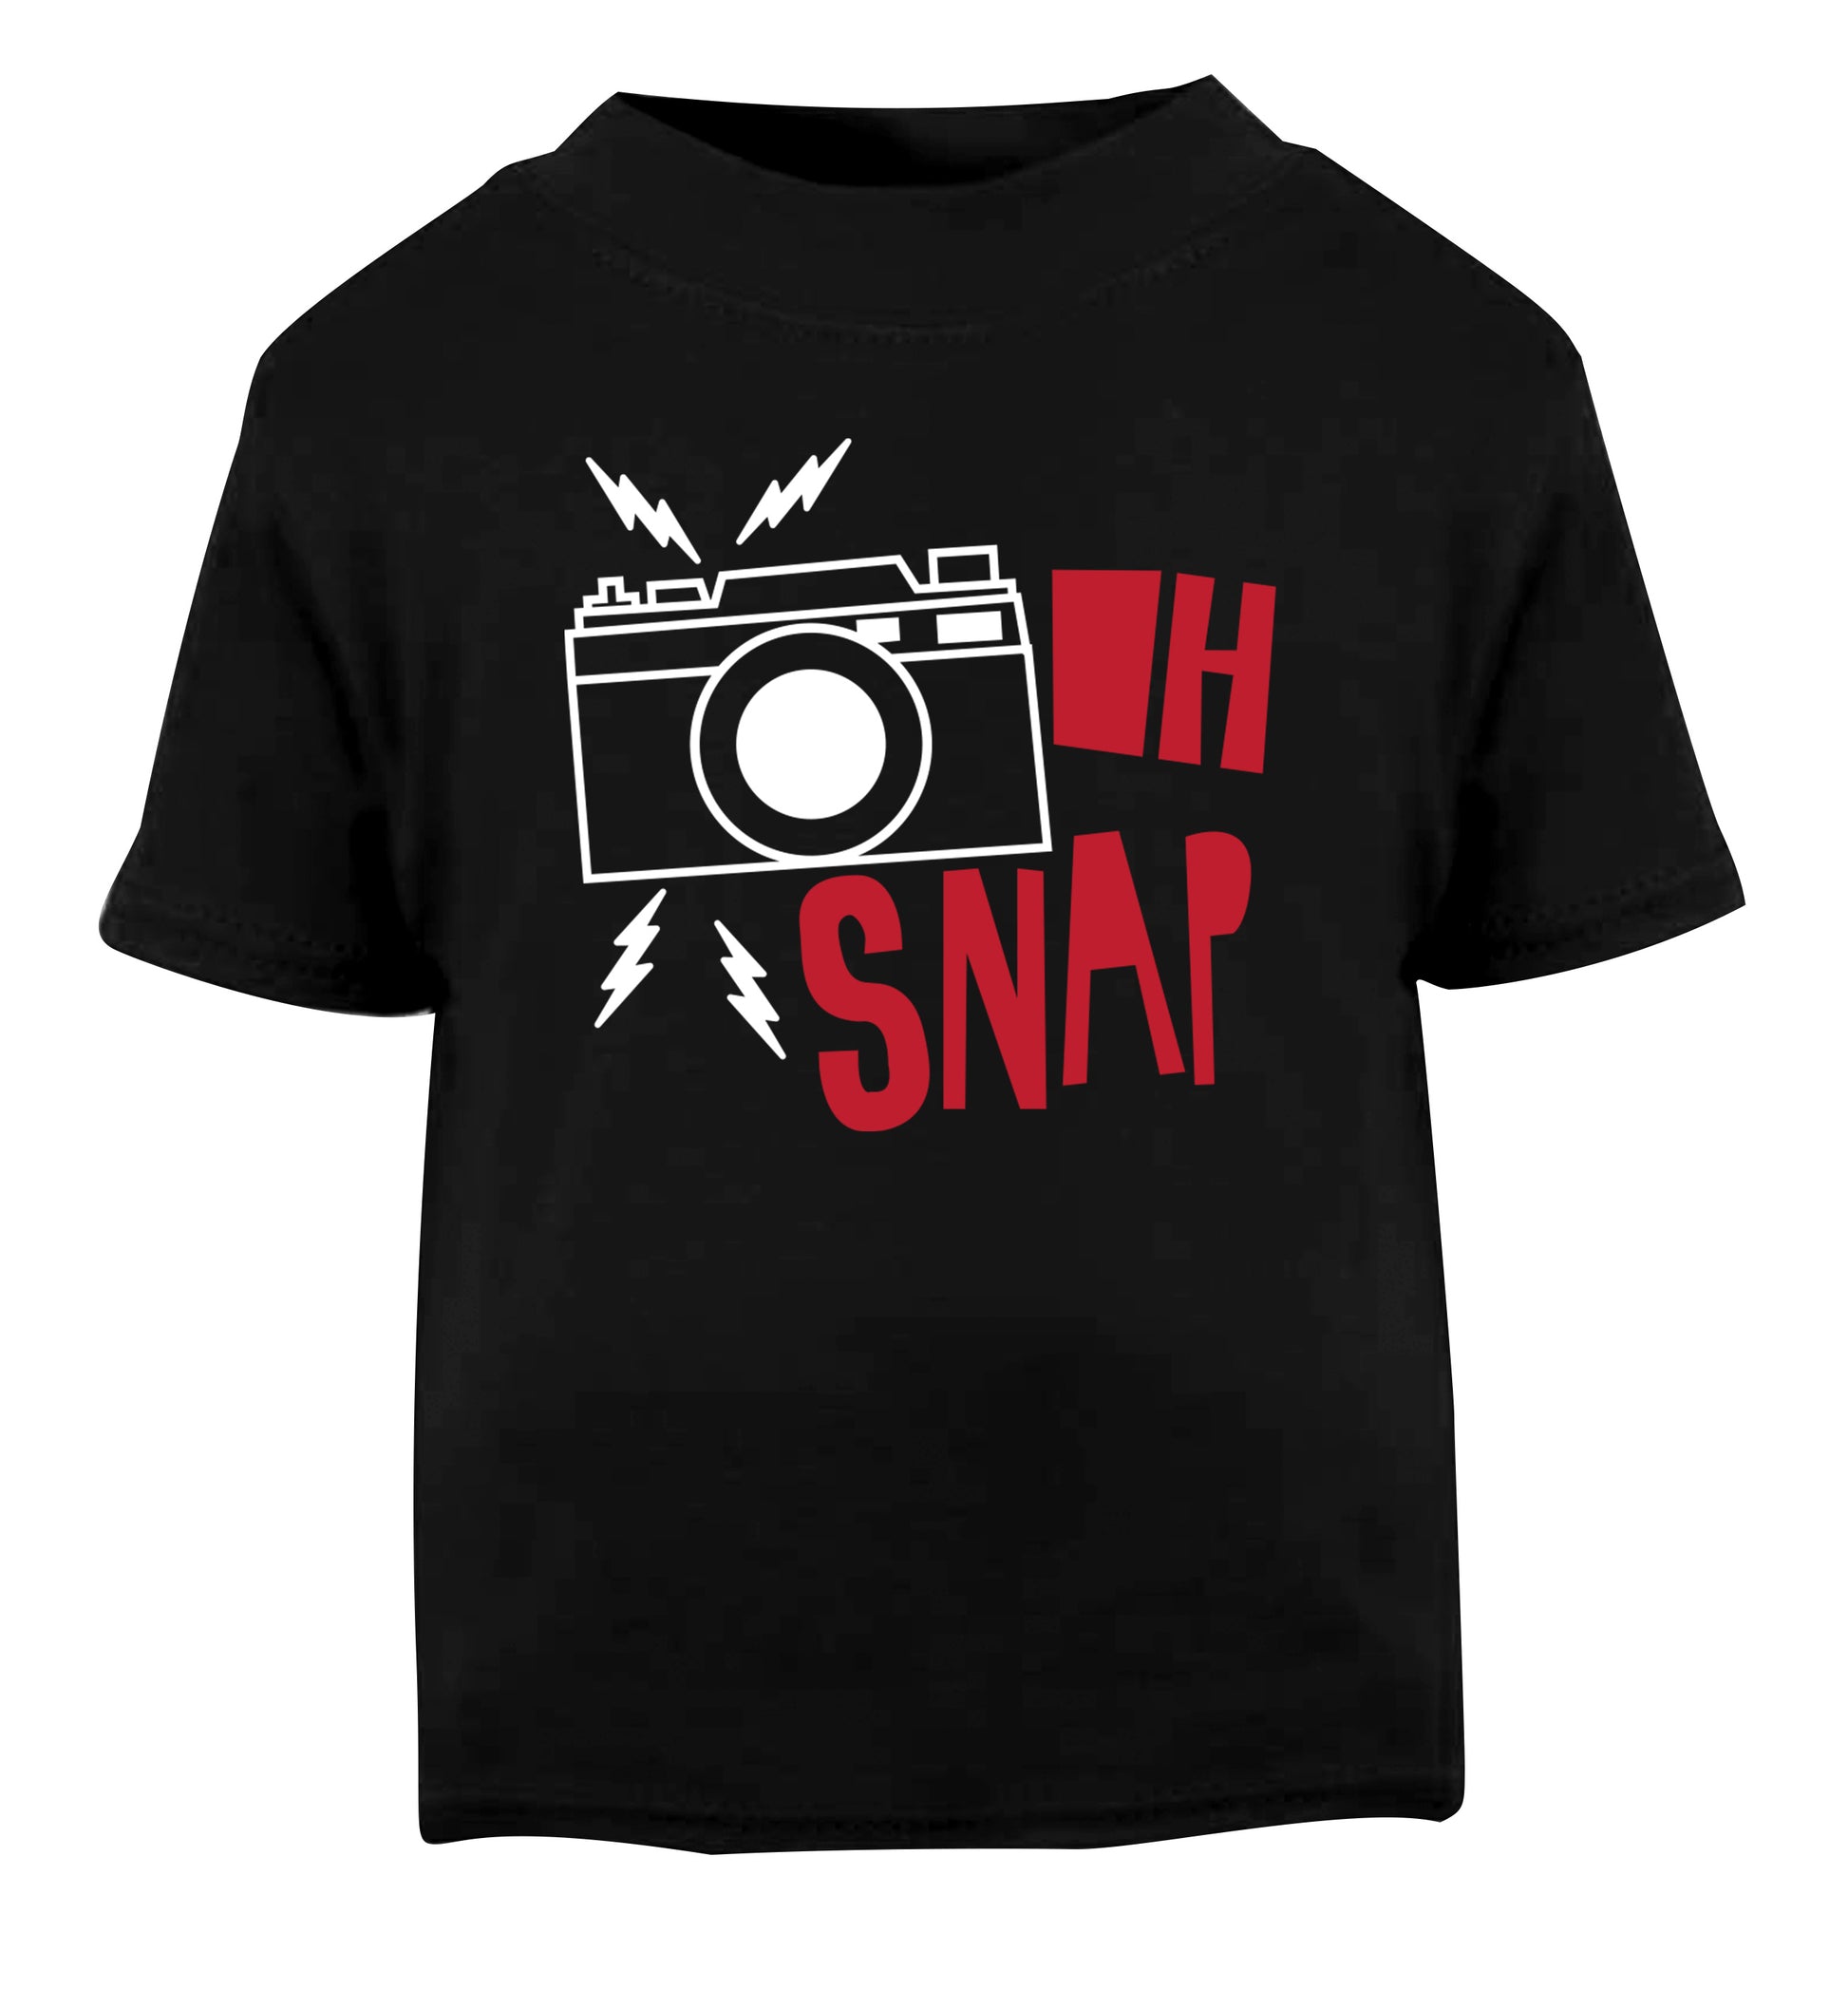 Oh Snap Black Baby Toddler Tshirt 2 years